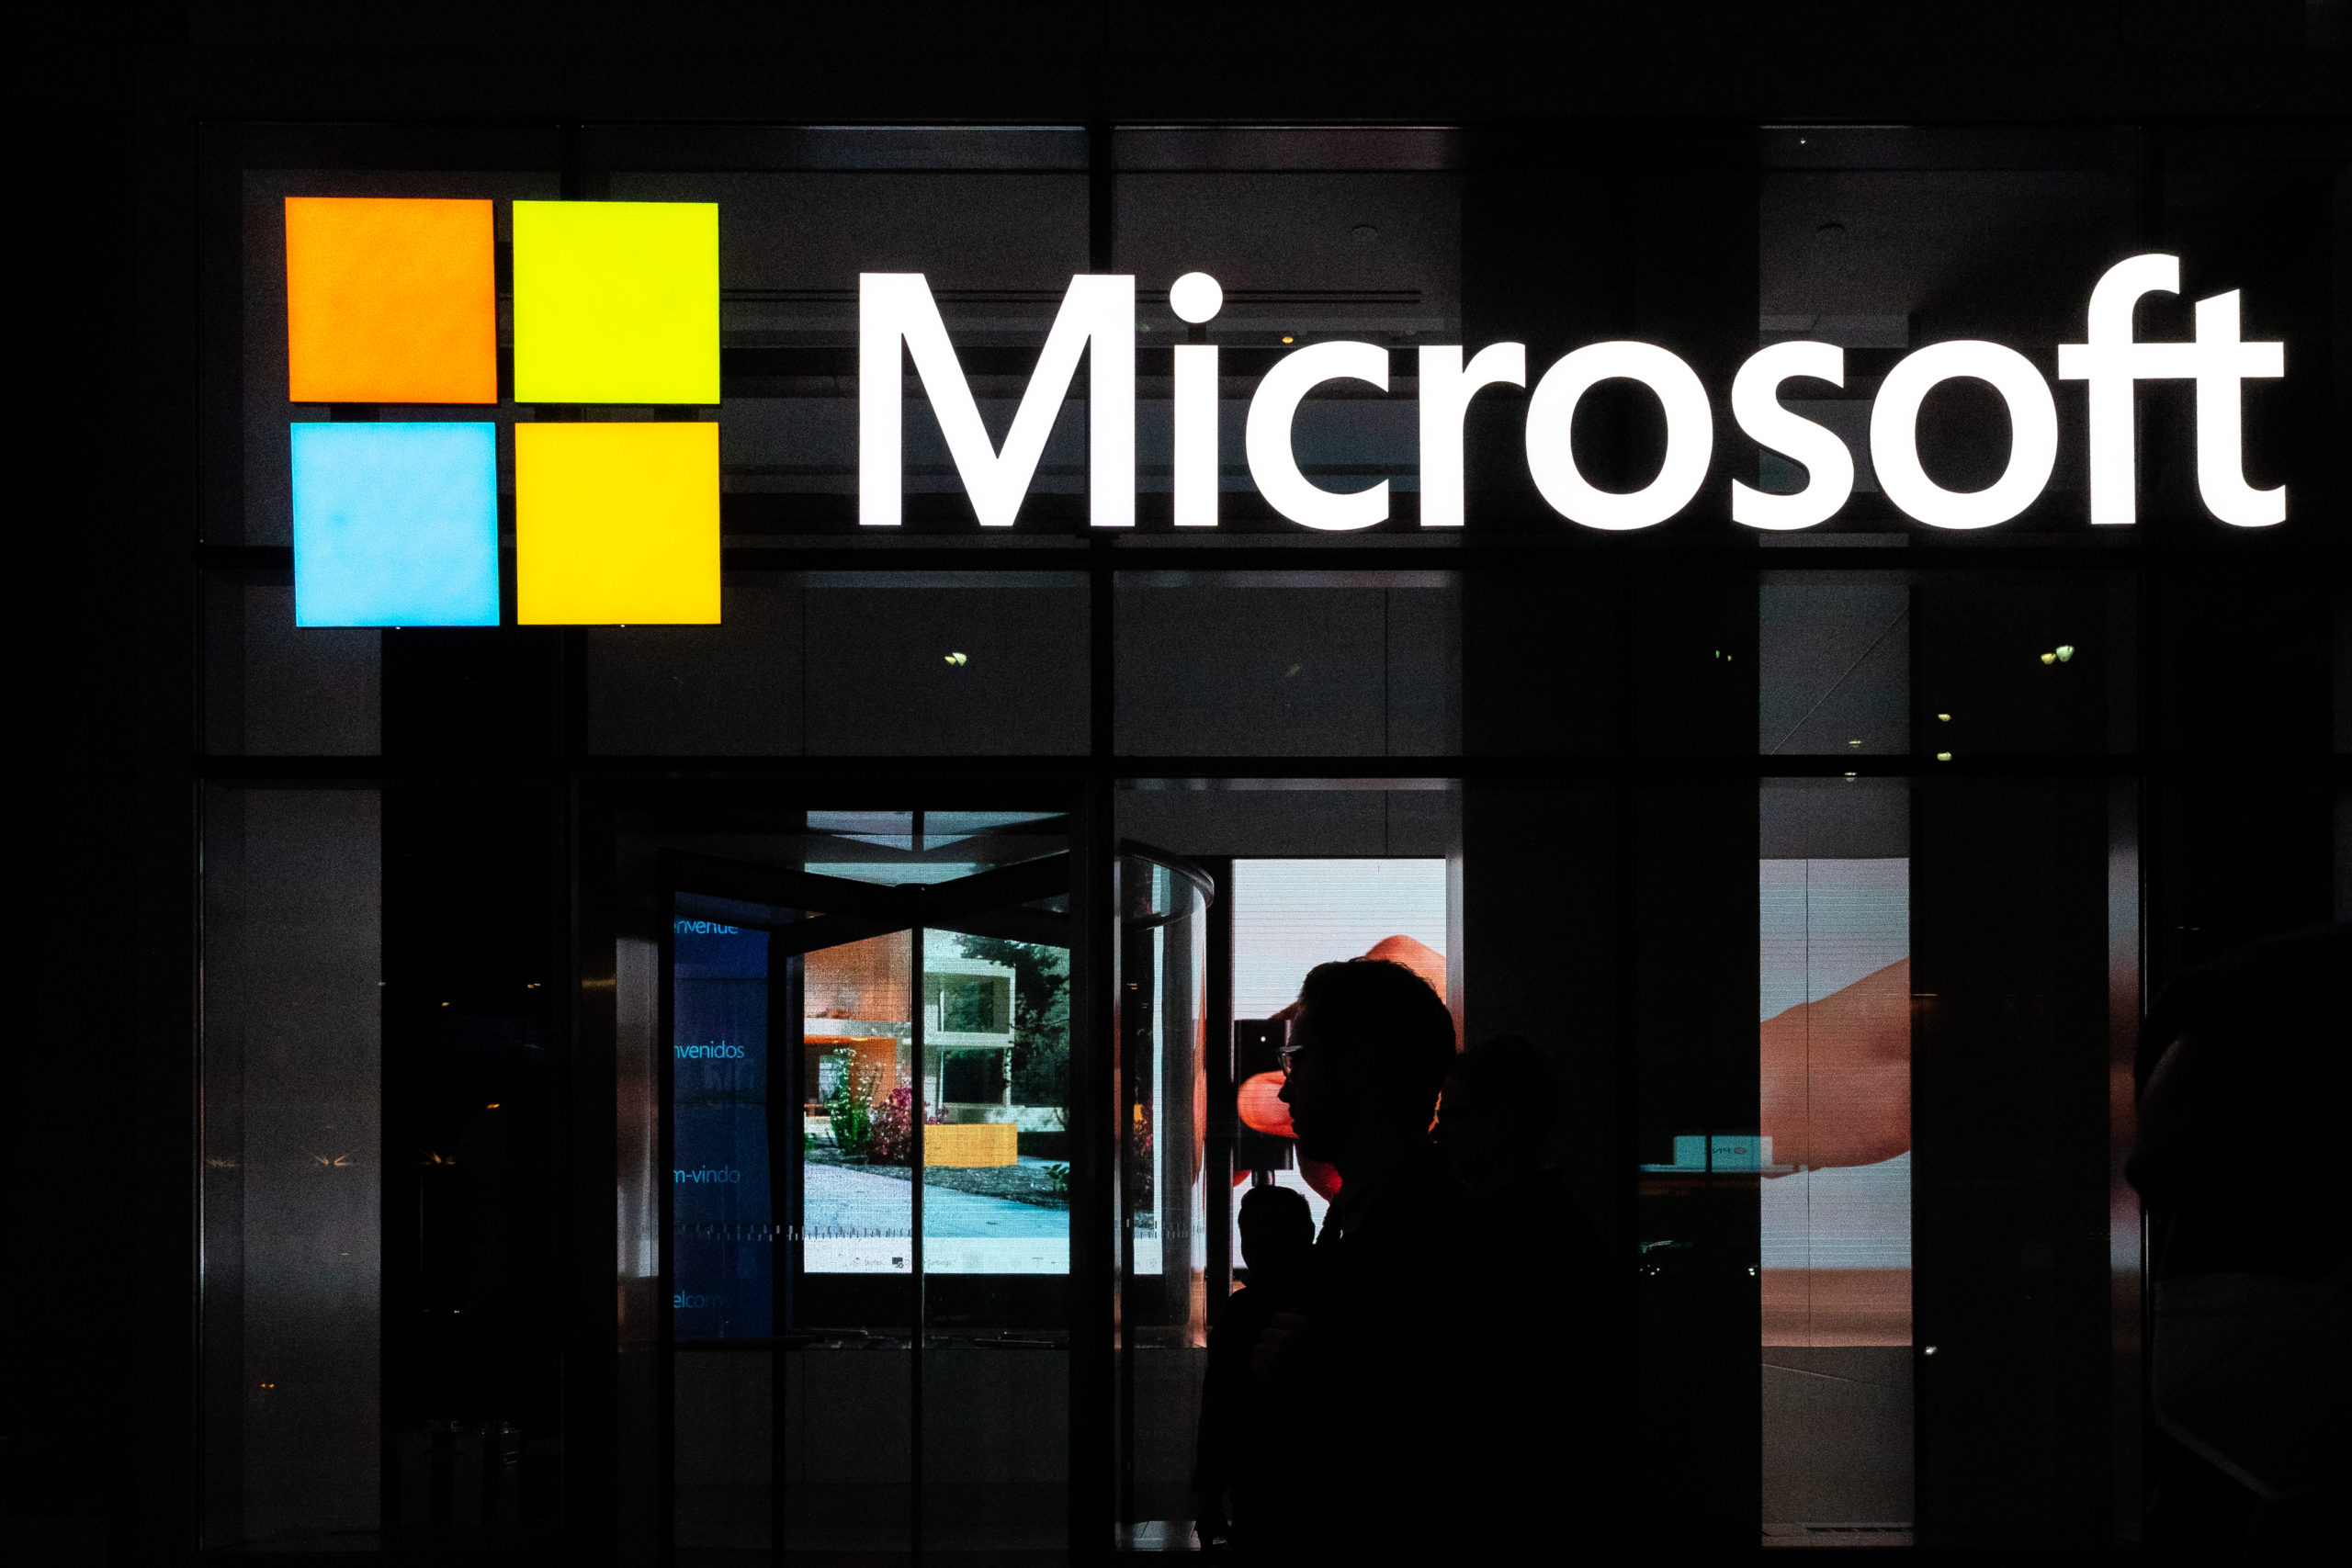 NEW YORK, NY - MARCH 13: A signage of Microsoft is seen on March 13, 2020 in New York City. Co-founder and former CEO of Microsoft Bill Gates steps down from Microsoft board to spend more time on the Bill and Melinda Gates Foundation. (Photo by Jeenah Moon/Getty Images)